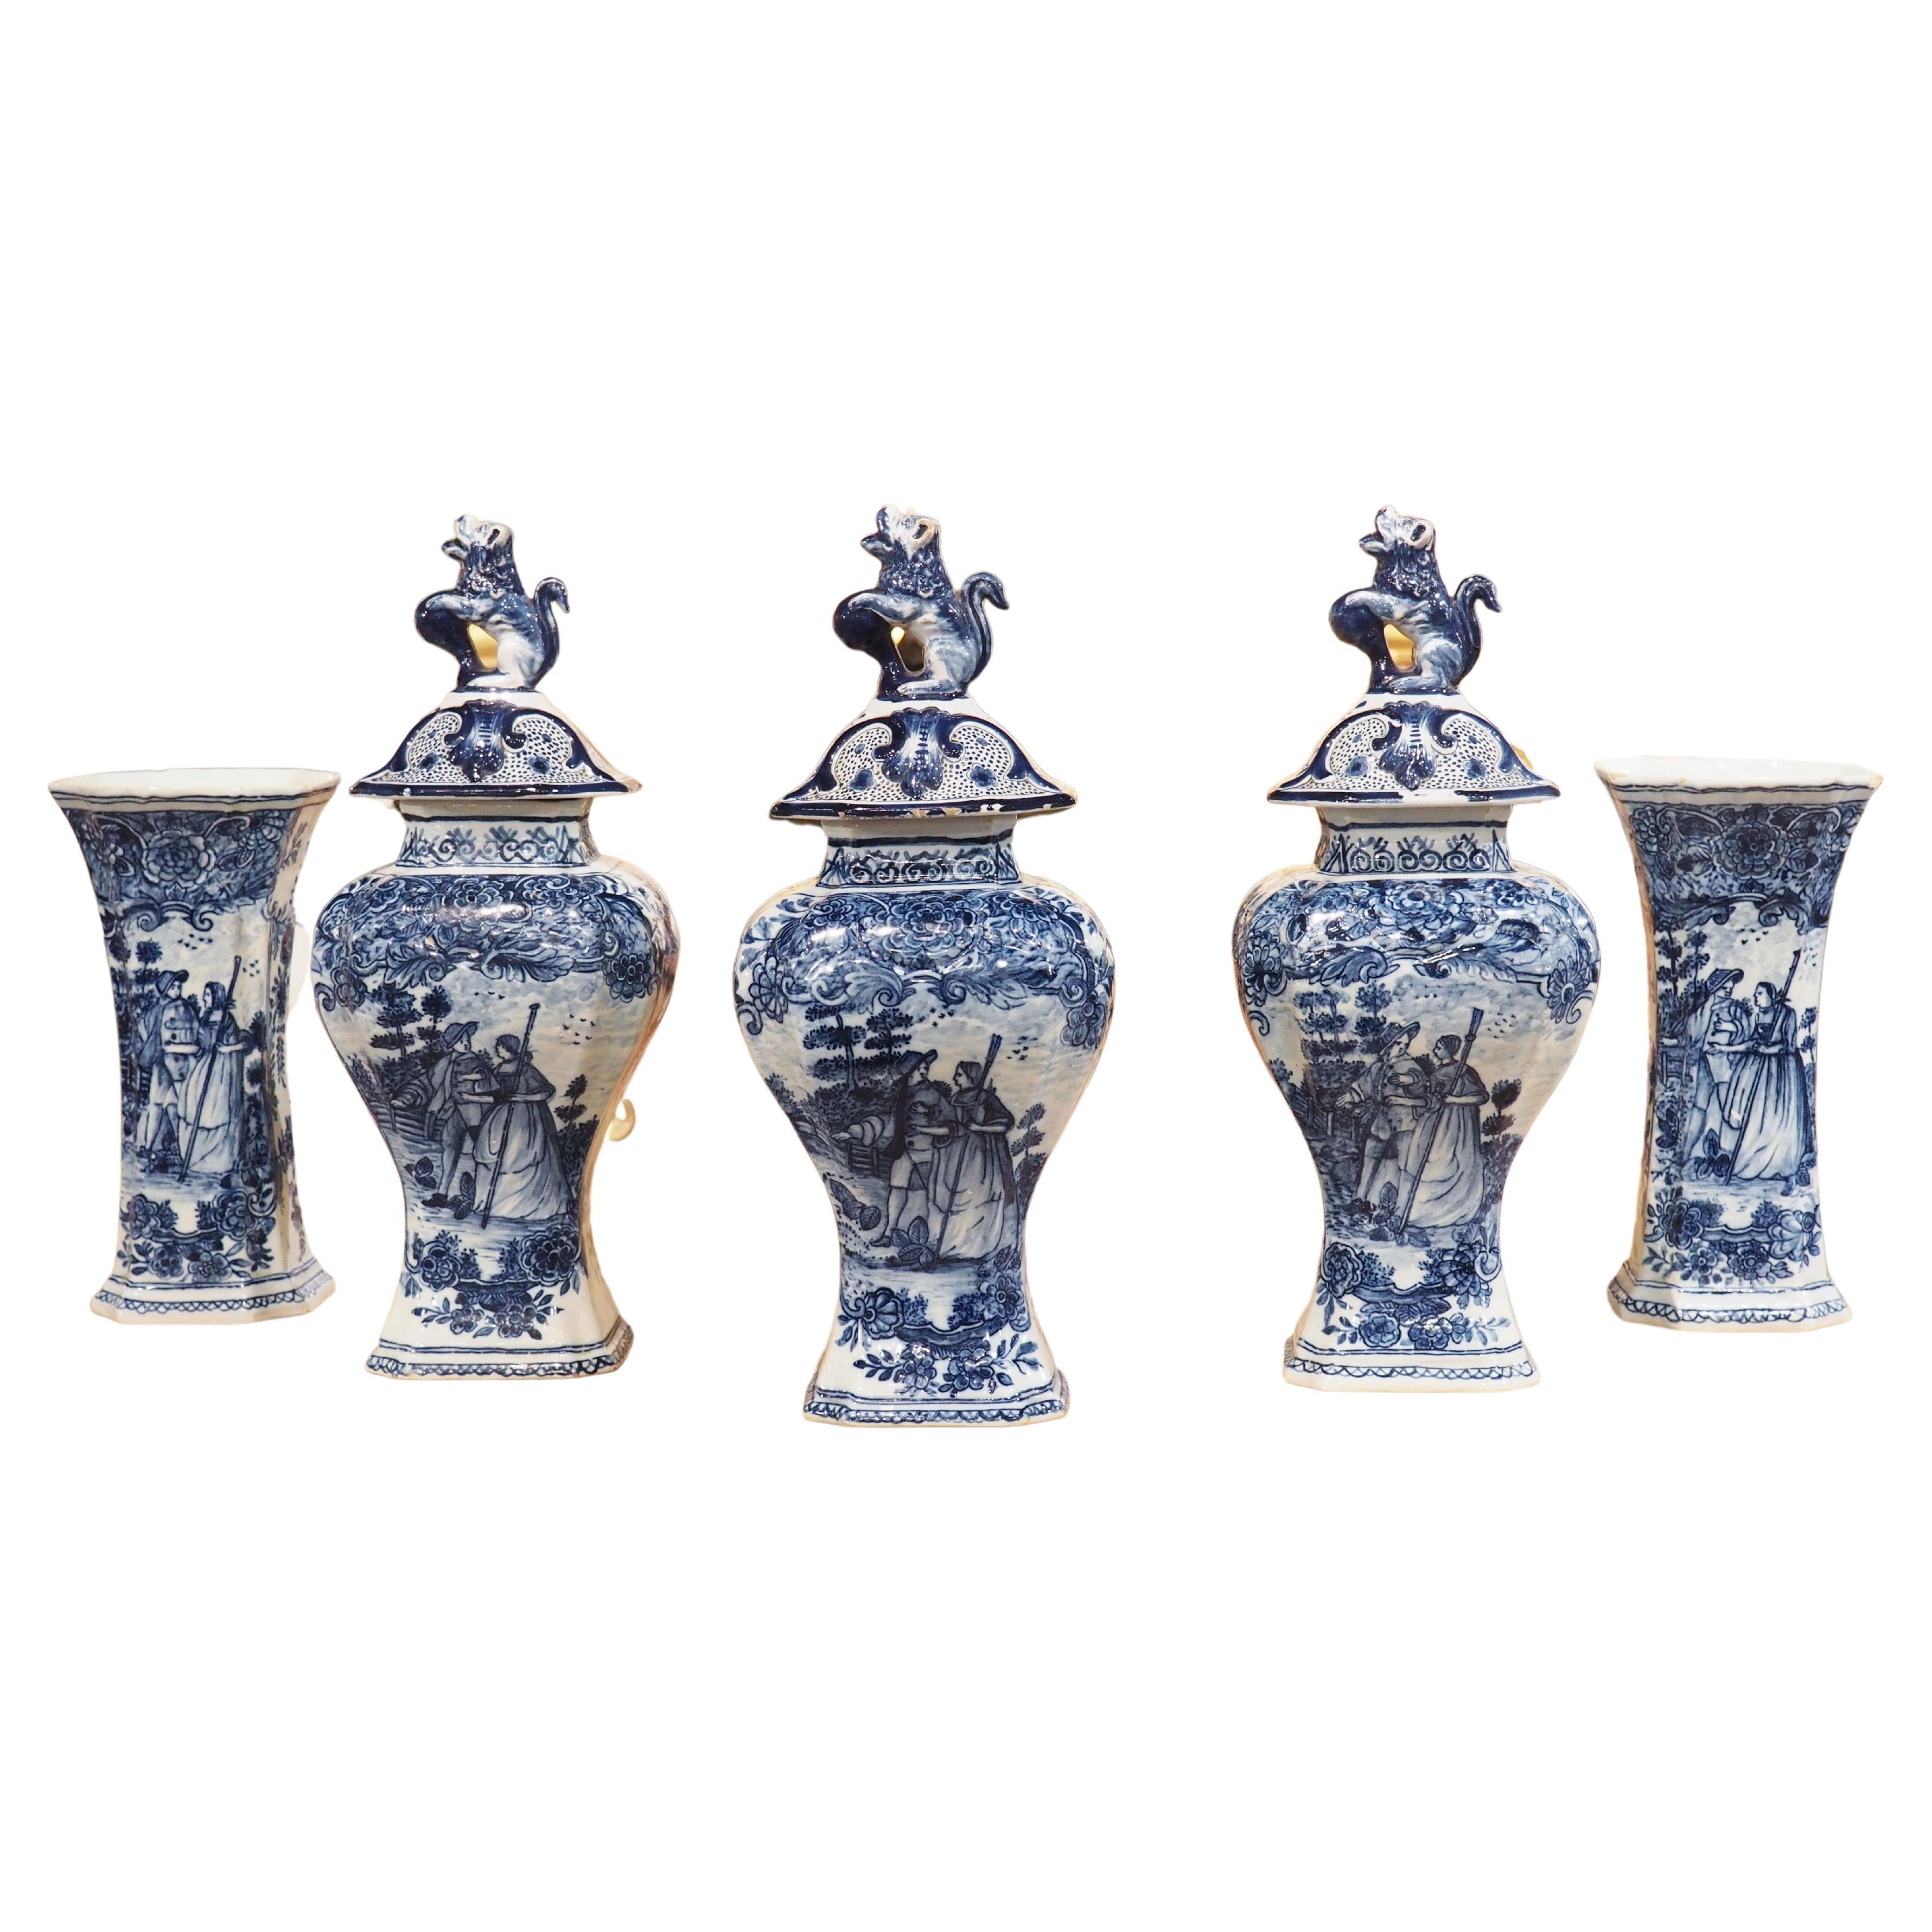 Set of 5 Circa 1900 Blue and White Delft Vases from Holland